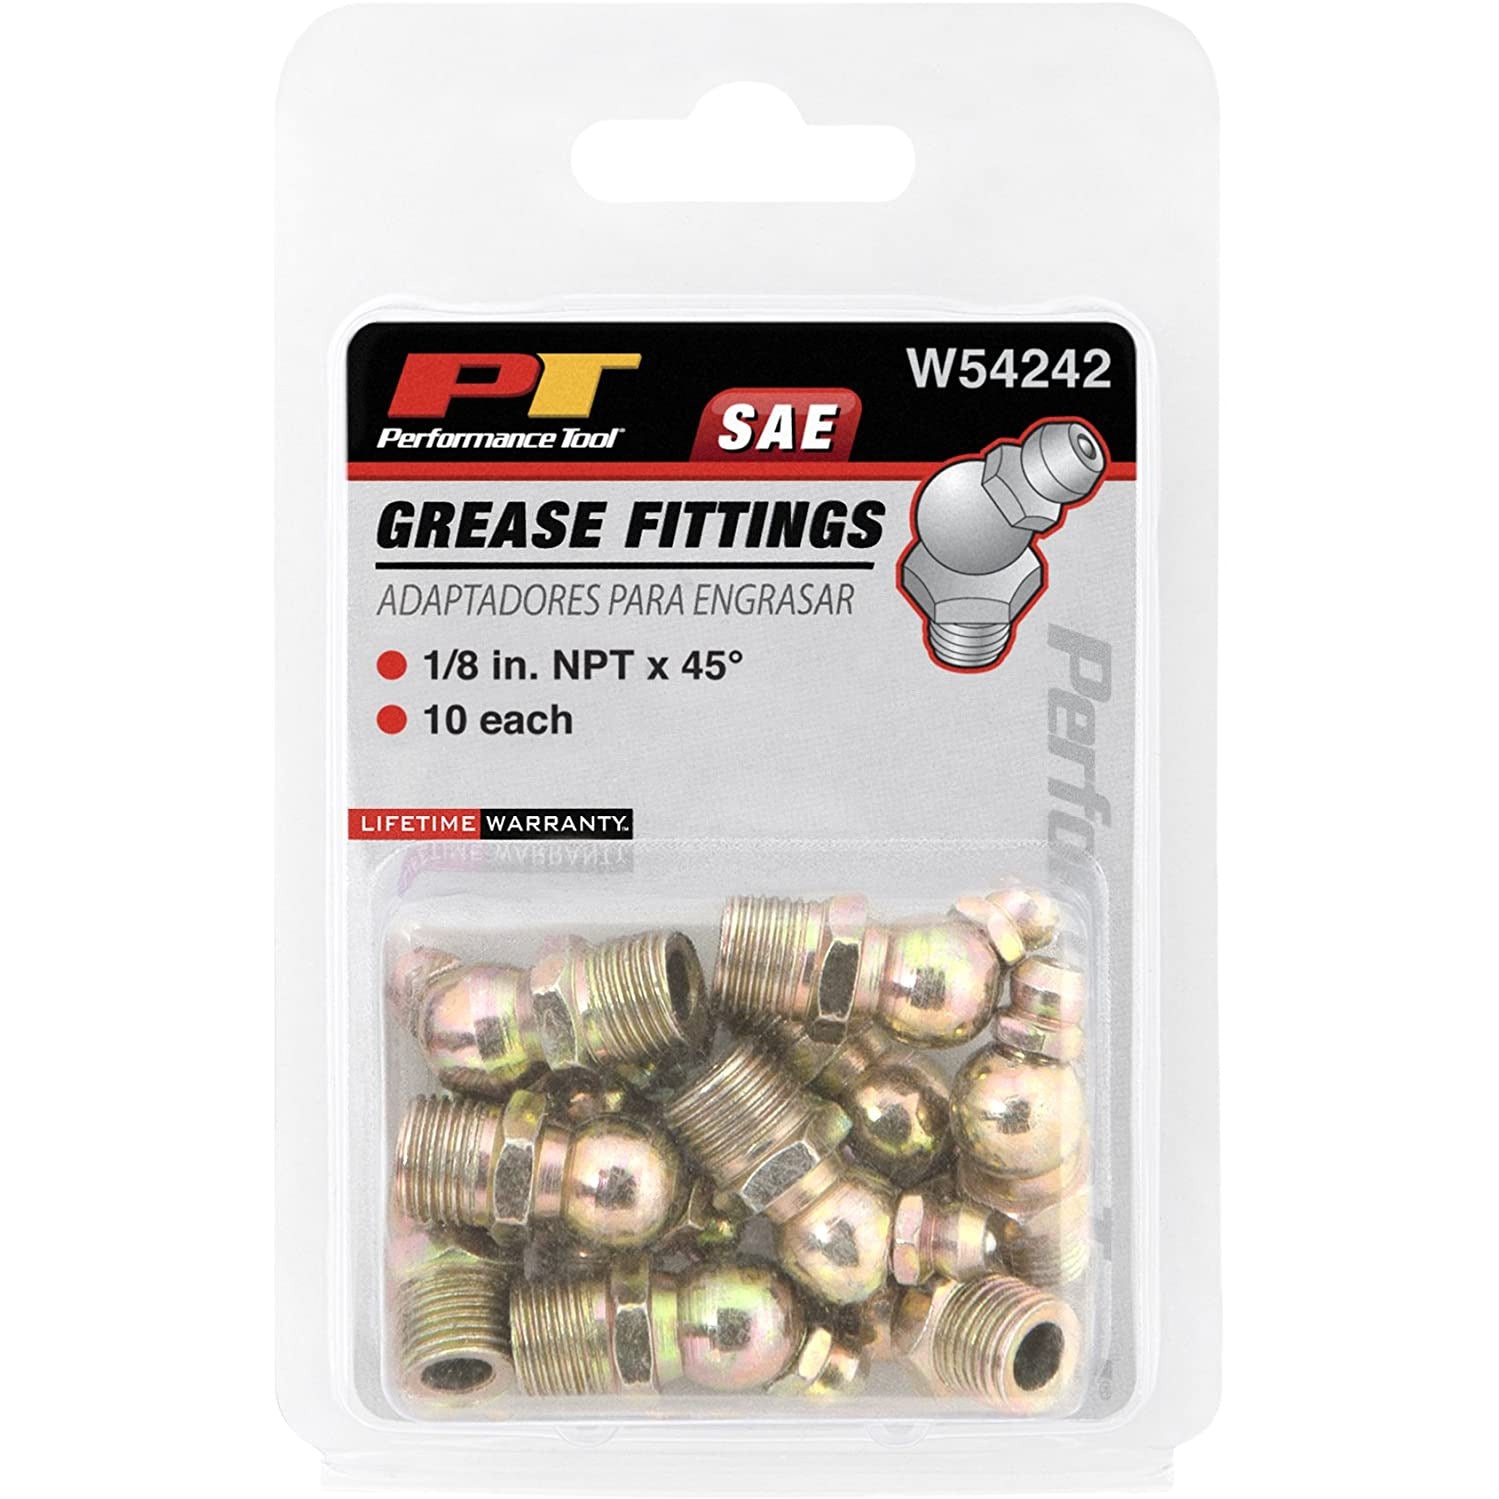 WIL W54242 Performance Tool 45 Degree 1/8" SAE Grease Fittings (10 pk)